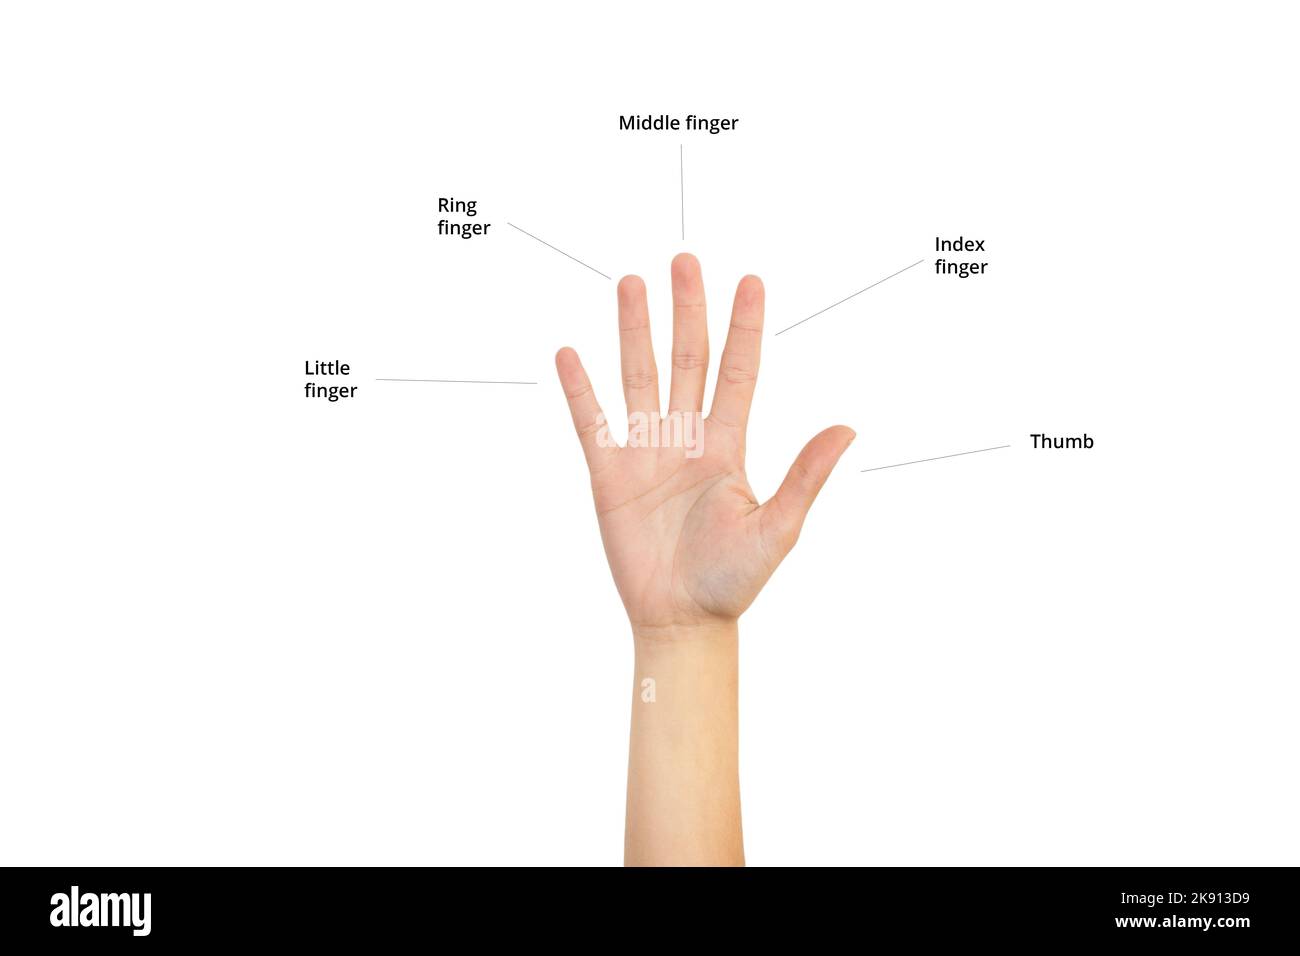 Finger And Hand Parts Names